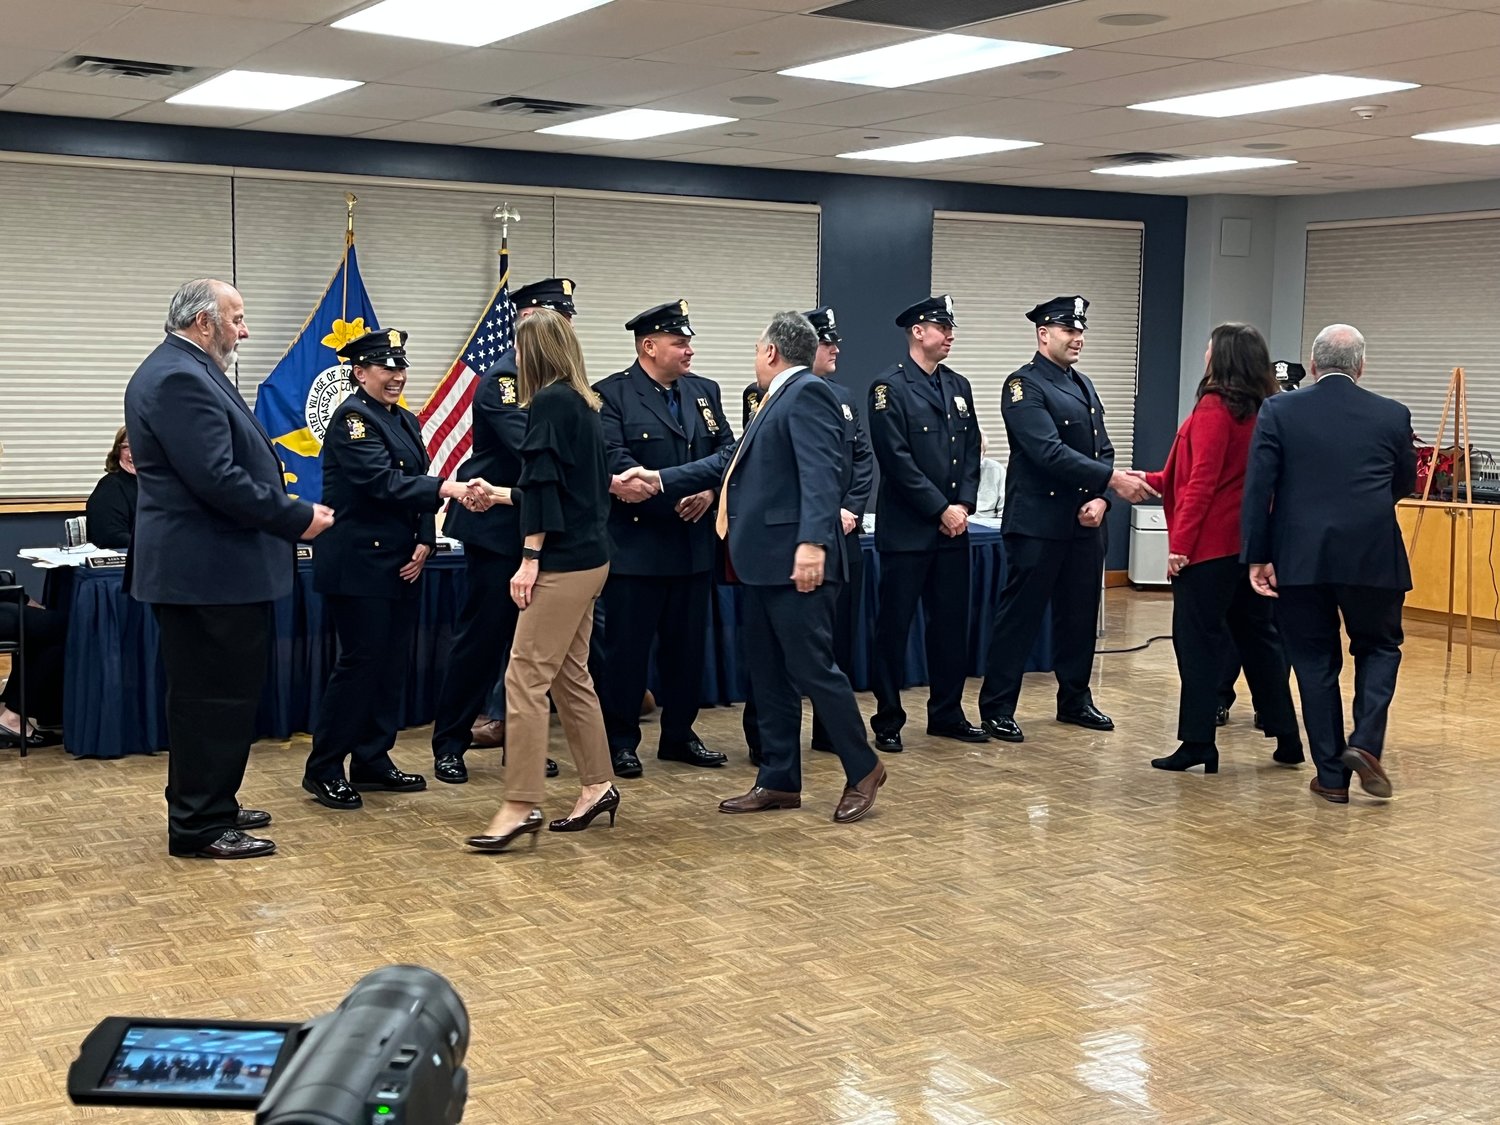 Village officials congratulate new officers on their appointment.